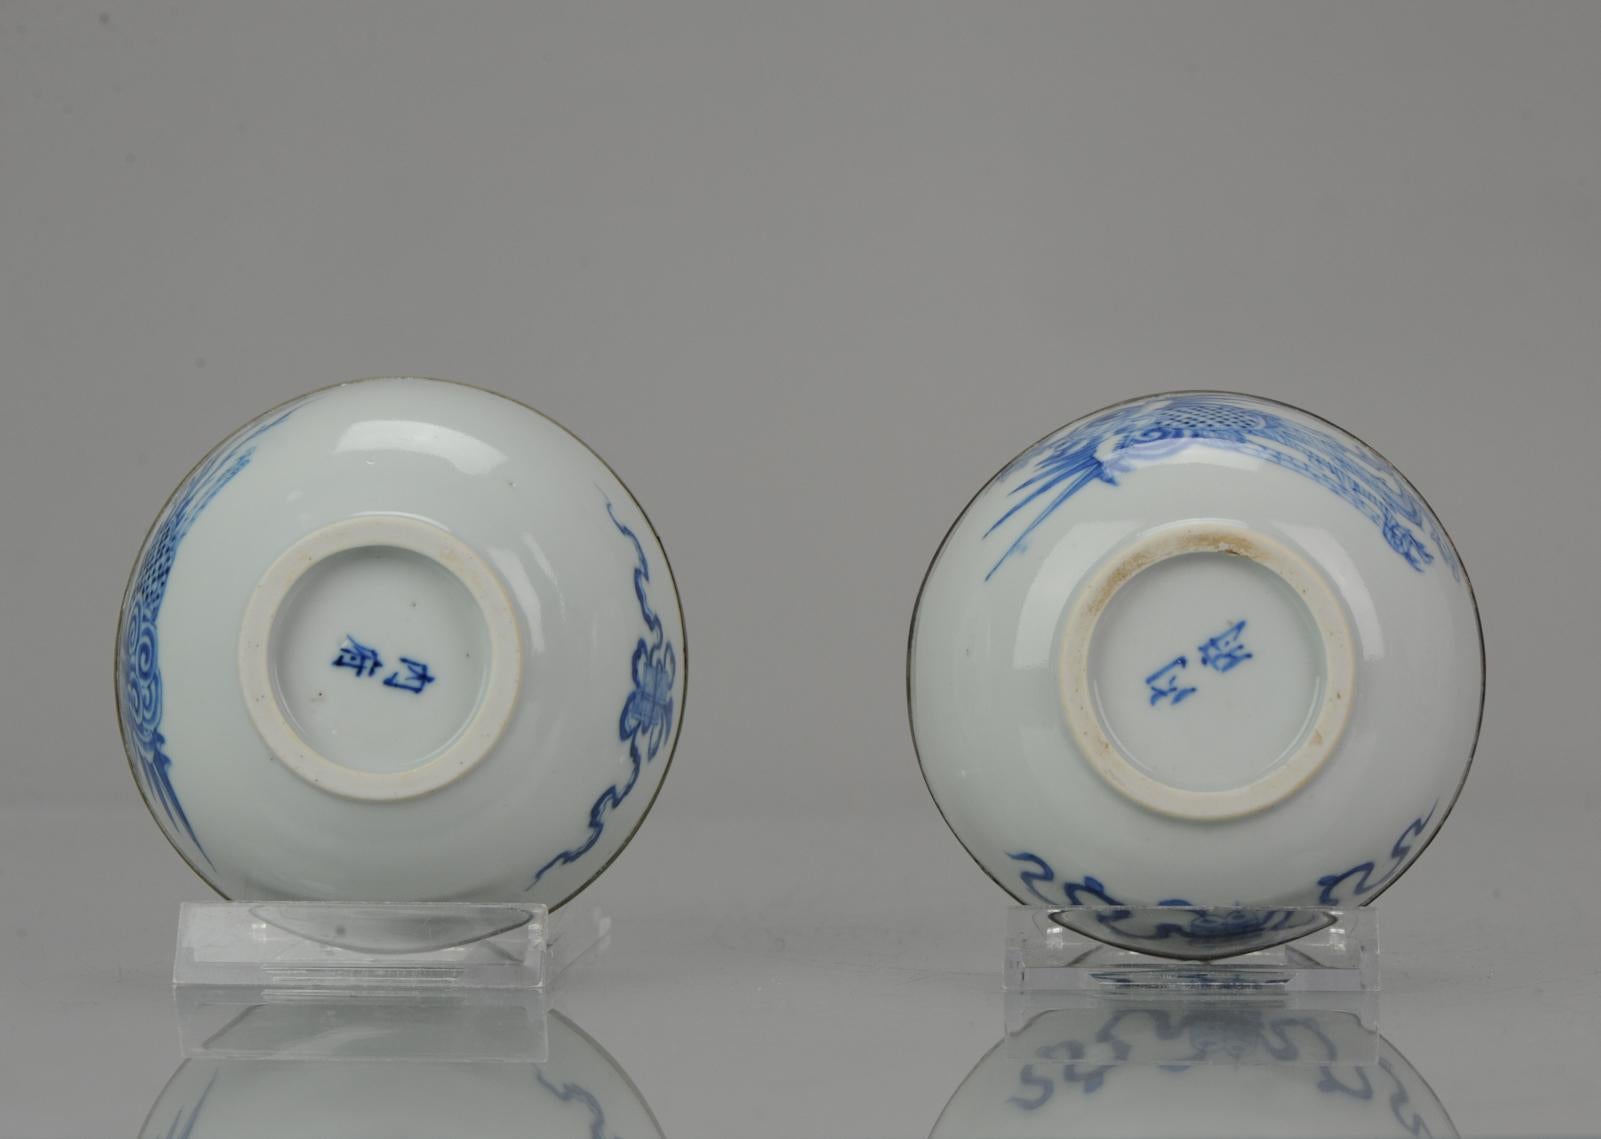 A top quality blue and white porcelain bowl, Fenghuang. China, 19th century. For the Vietnamese market

Bleu de Hue
Chinese blue and white export porcelain for the Vietnamese market. The best 